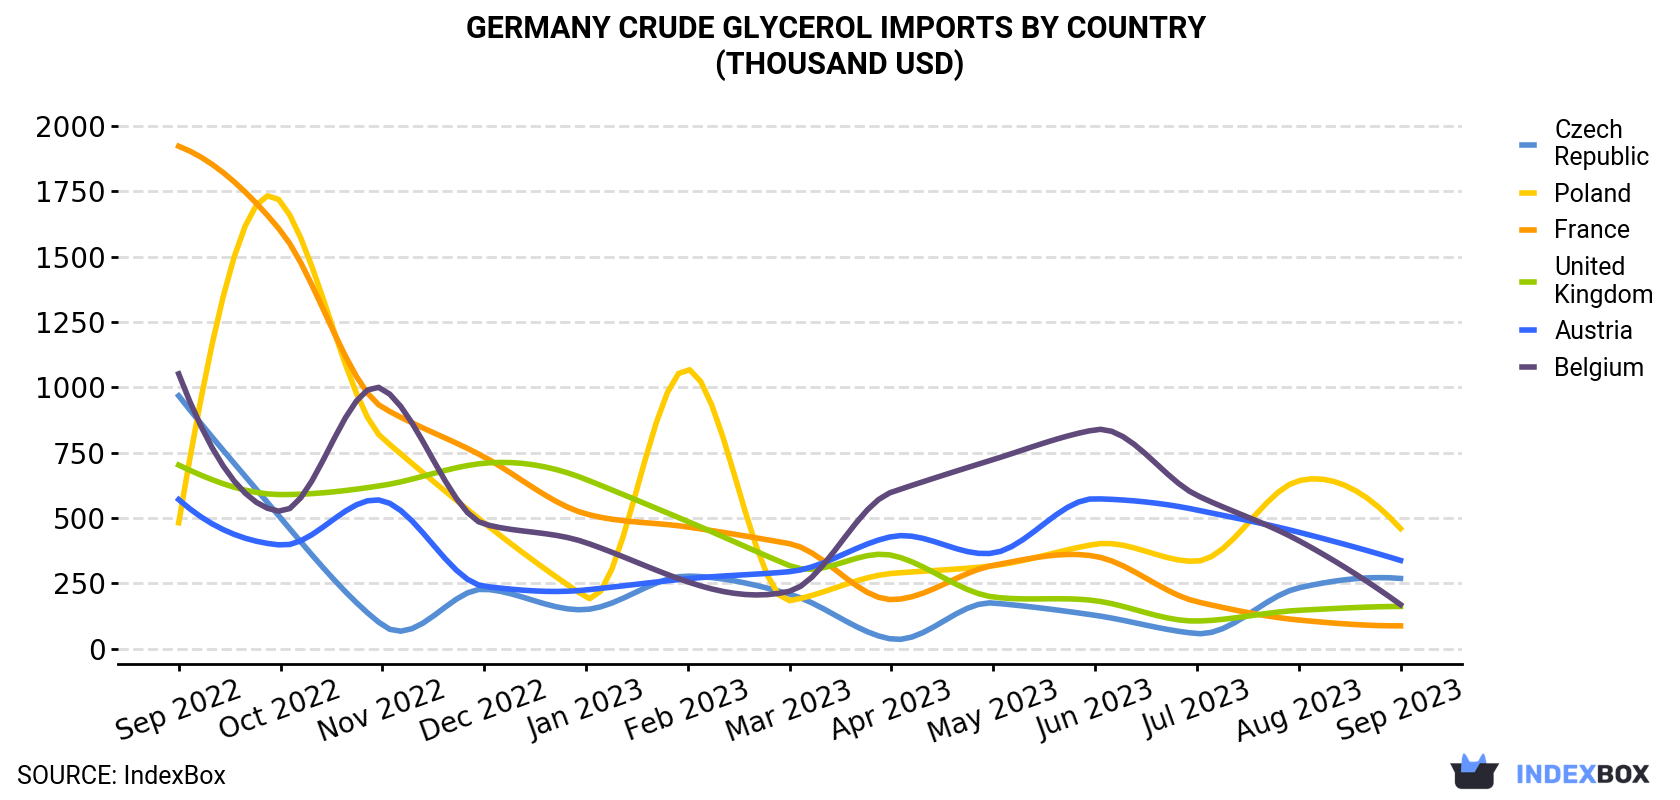 Germany Crude Glycerol Imports By Country (Thousand USD)